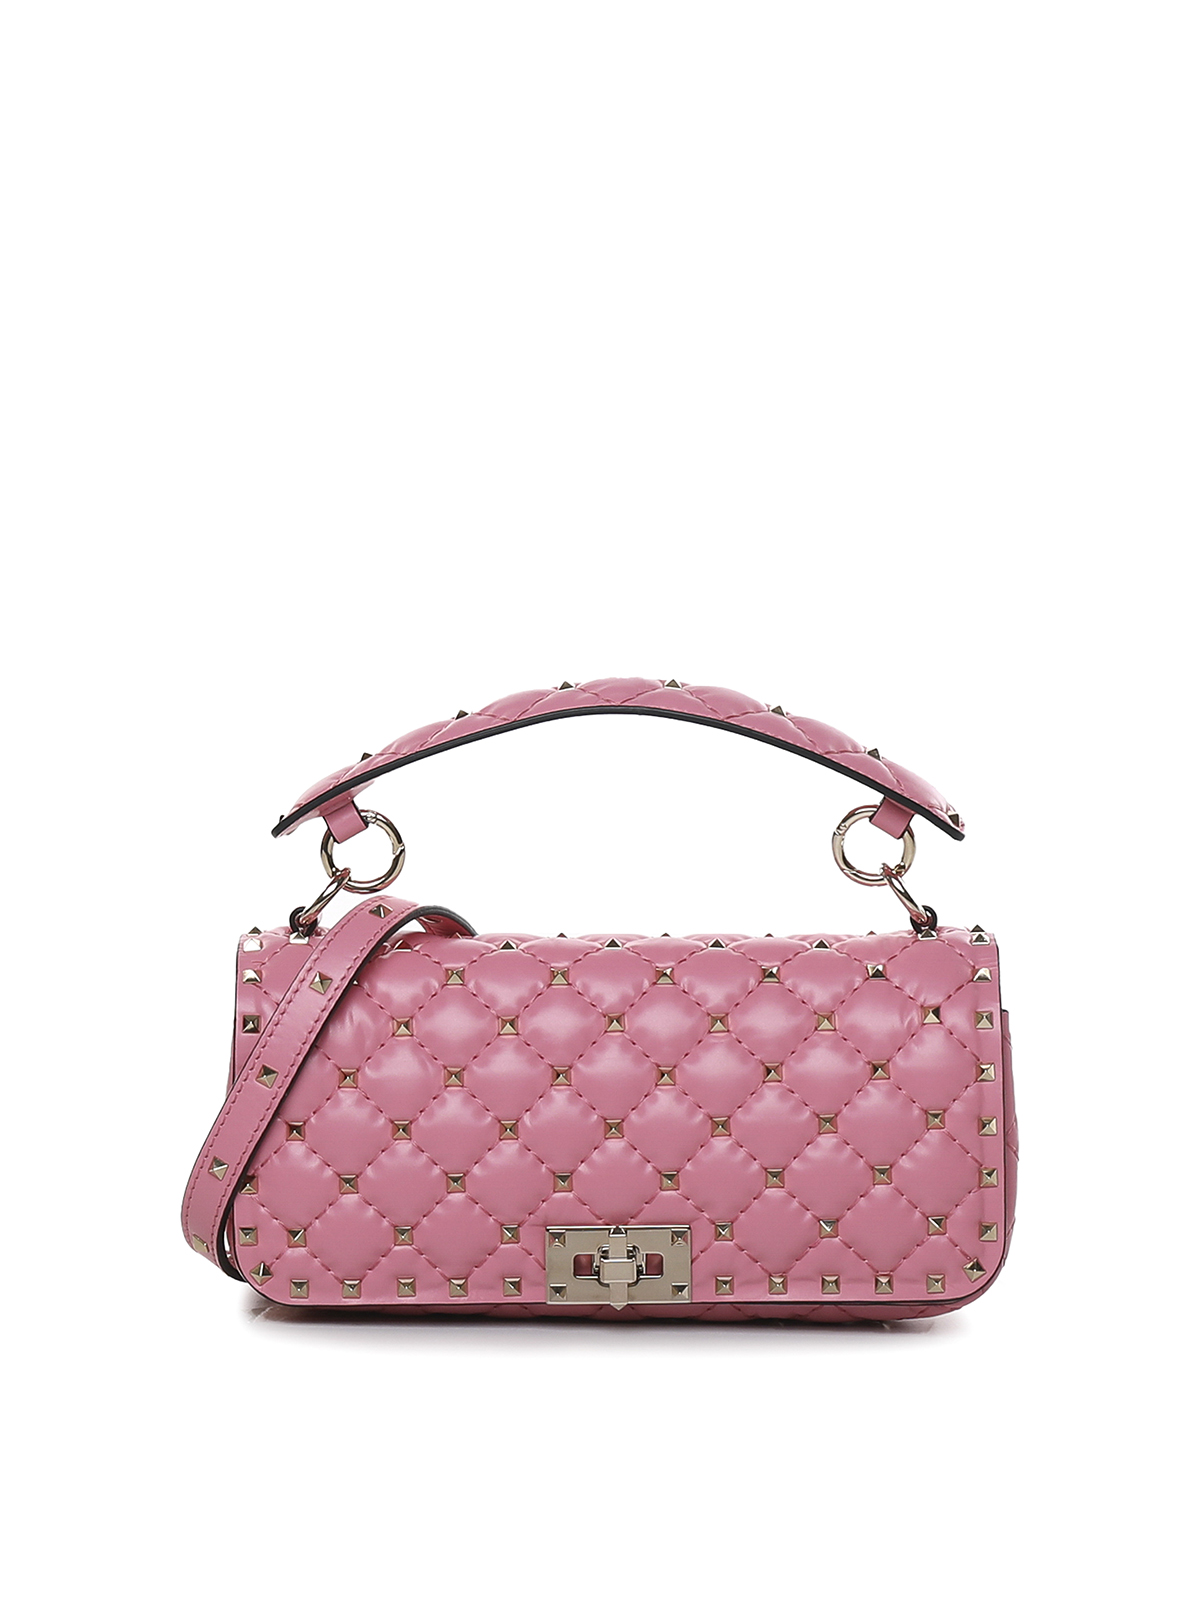 Valentino Garavani Quilted Leather Bag With Stud Details In Pink